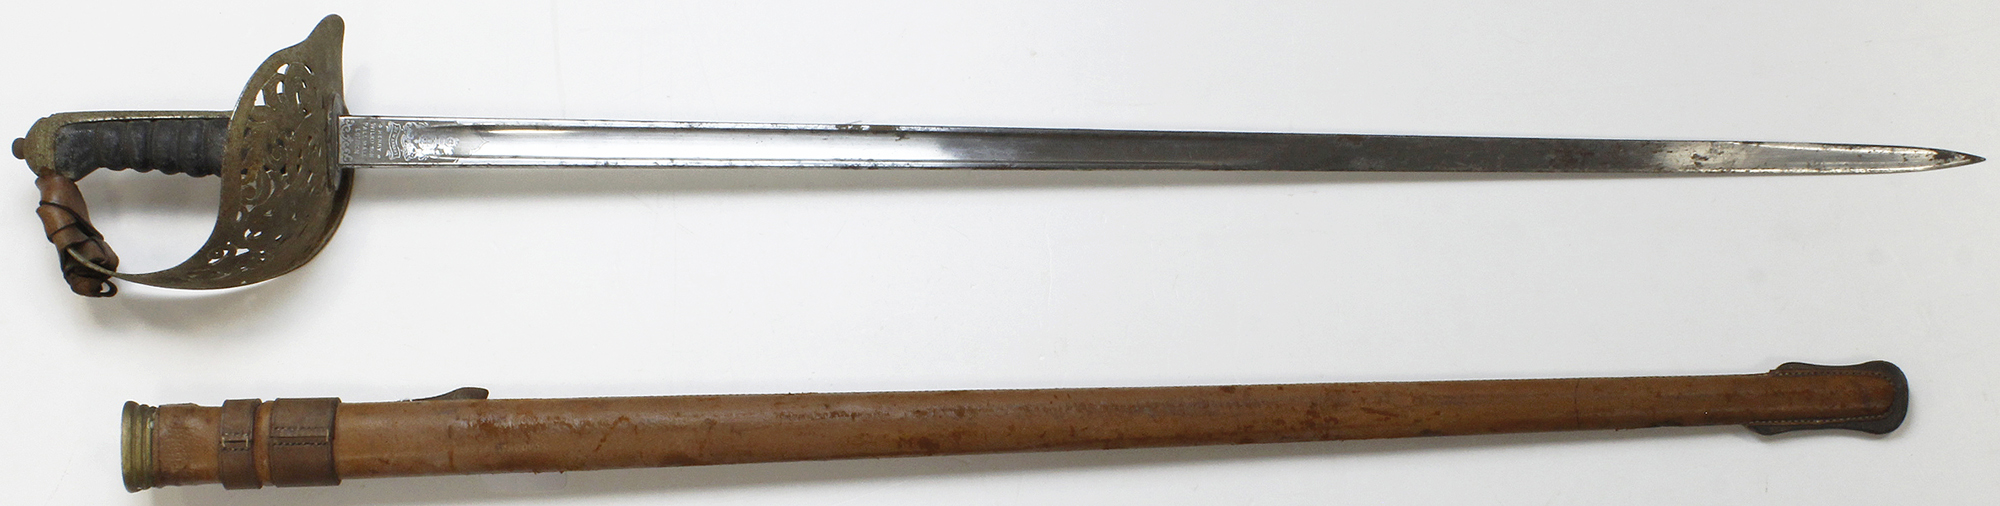 Sword Wilkinson made 1897 pattern NCO Infantry Officers pattern with plain blade in its leather